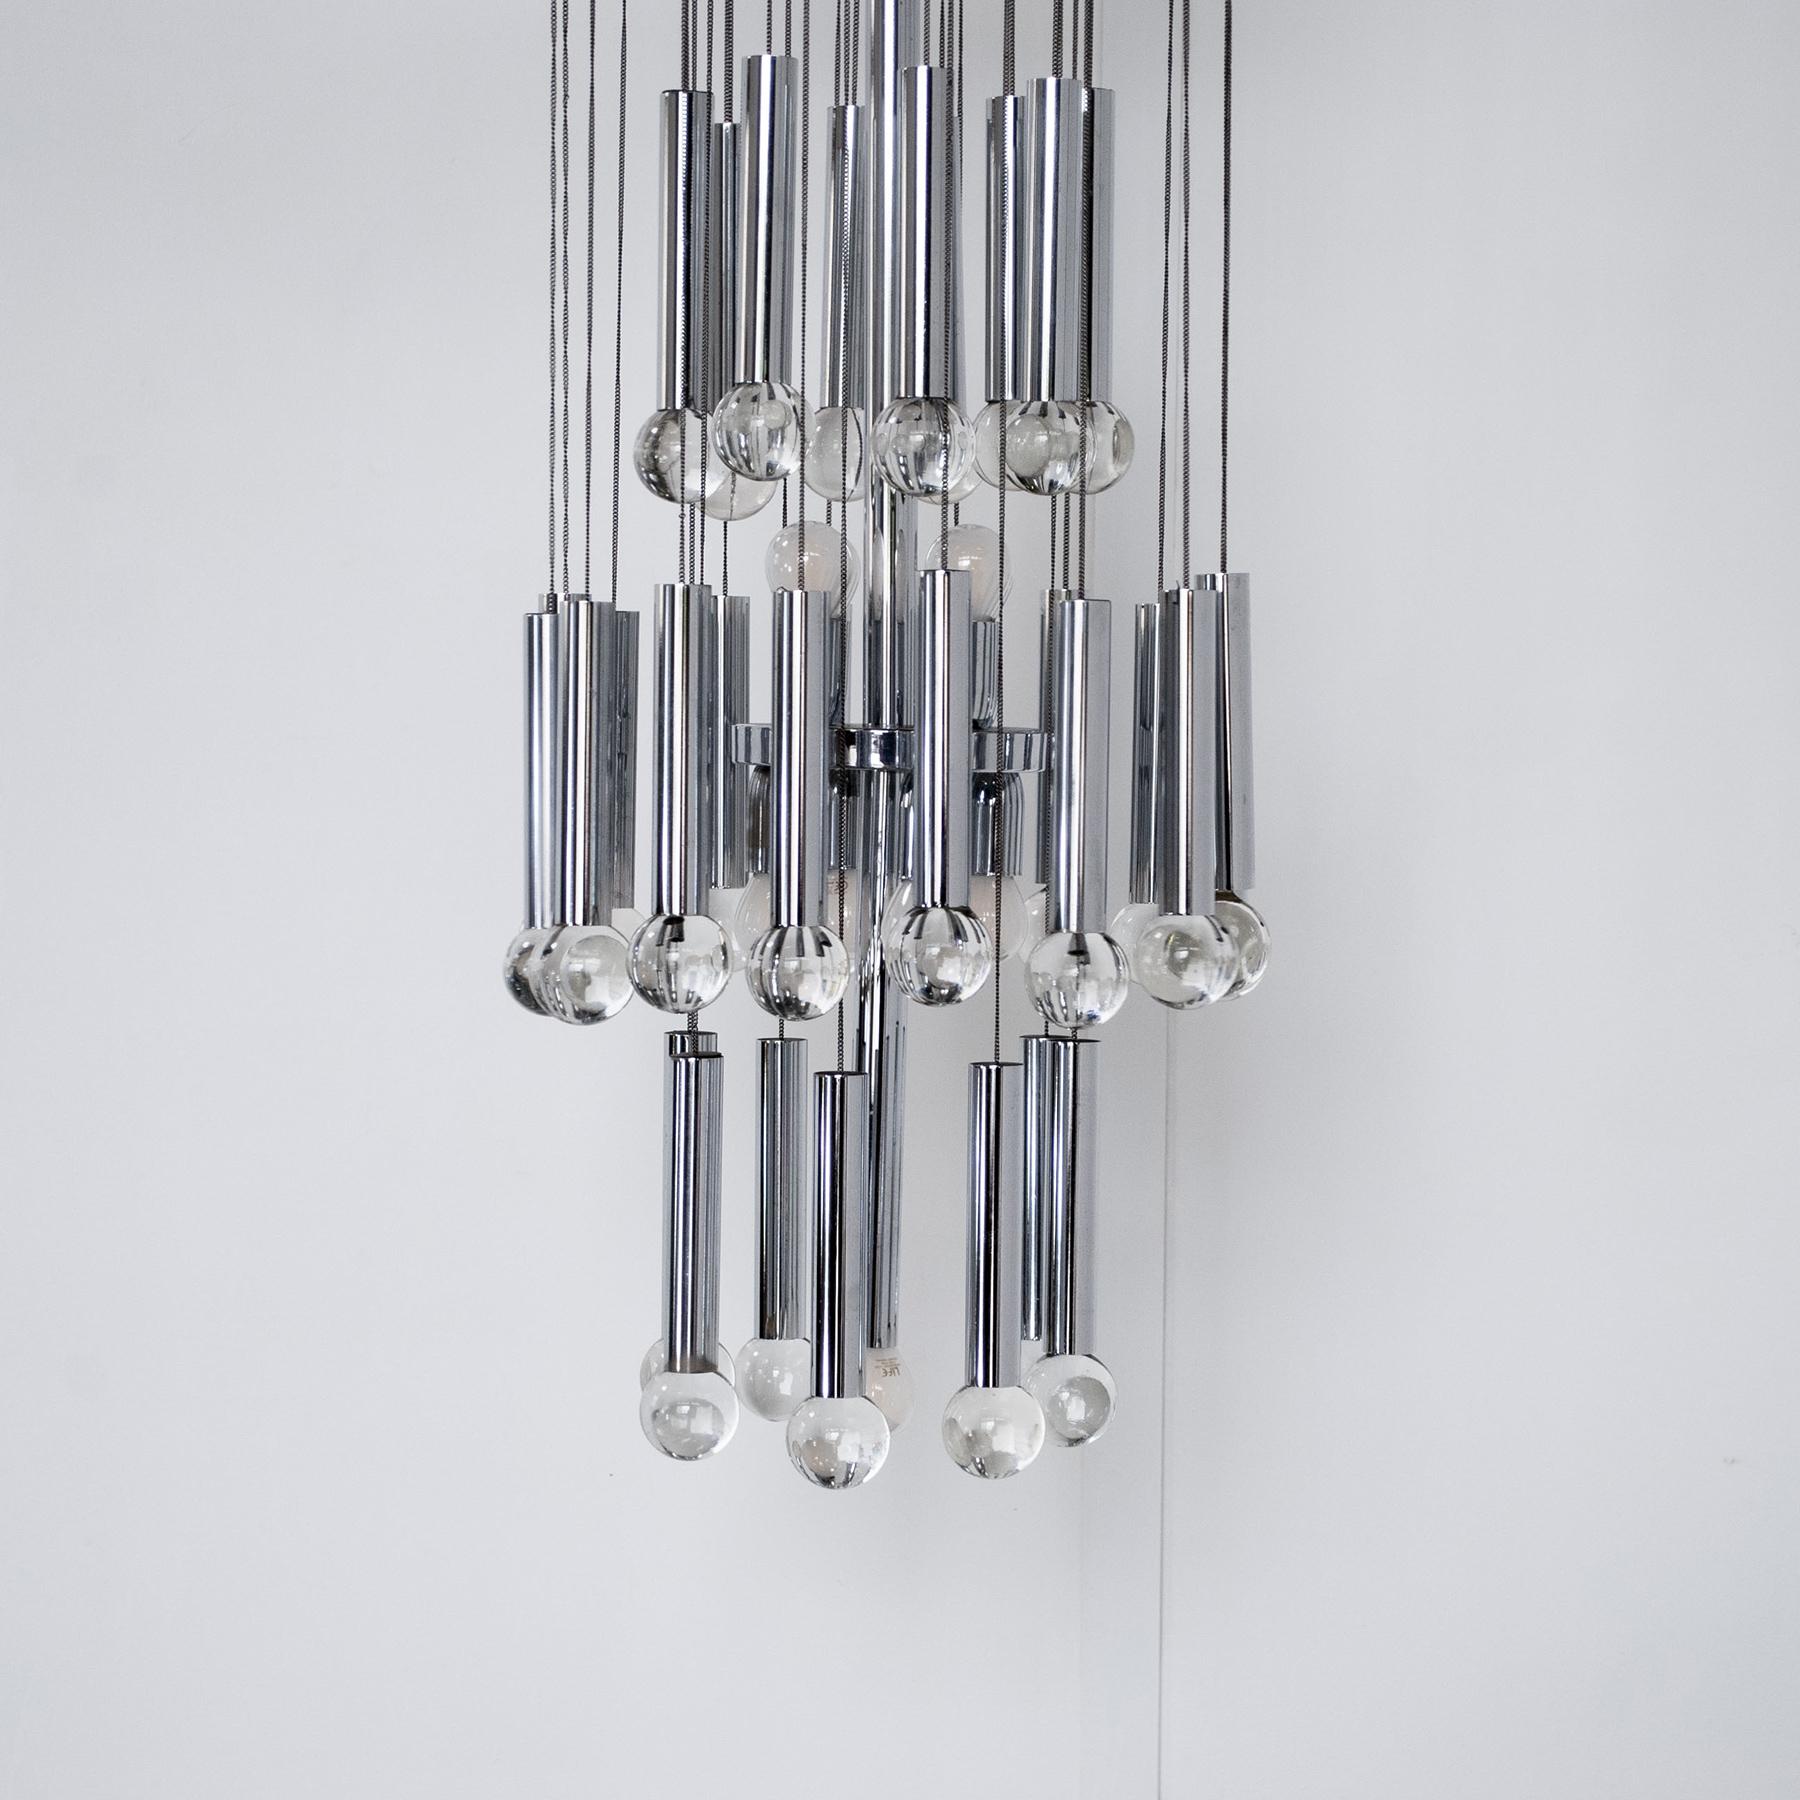 A classic and iconic chandelier by Gaetano Sciolari from the late sixties.

Angelo Gaetano Sciolari (1927-1994) was the owner of Sciolari Lighting and designer for Italian manufacturer Stilnovo in the 1950s. While working for Stilnovo, Sciolari